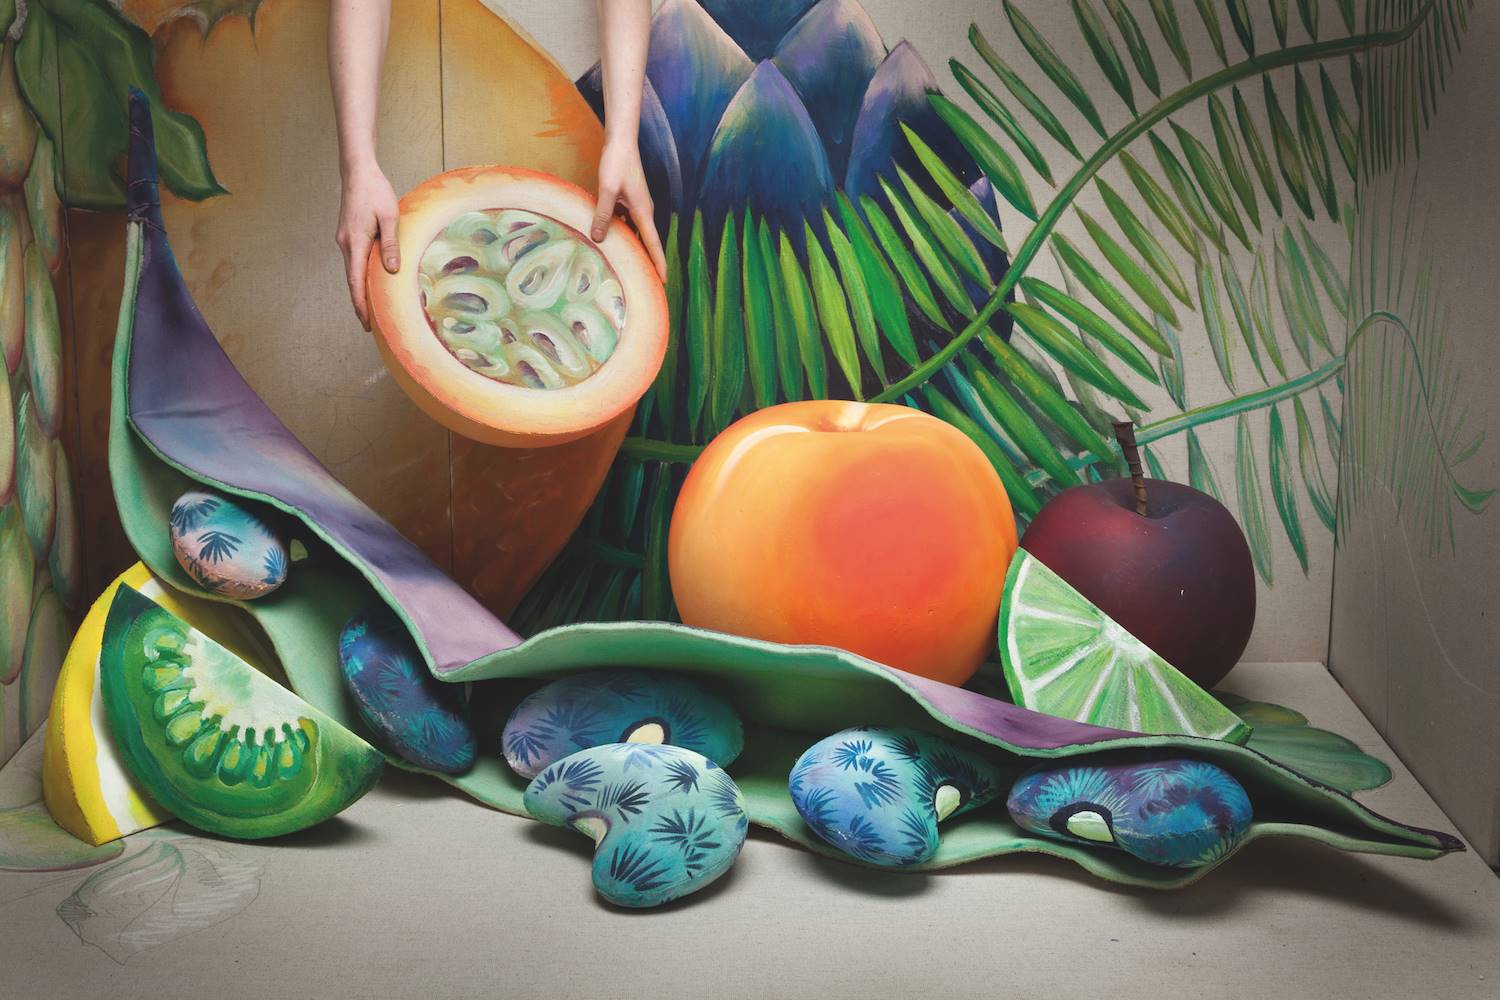 The Fruits of Labor, Hermès, 2014